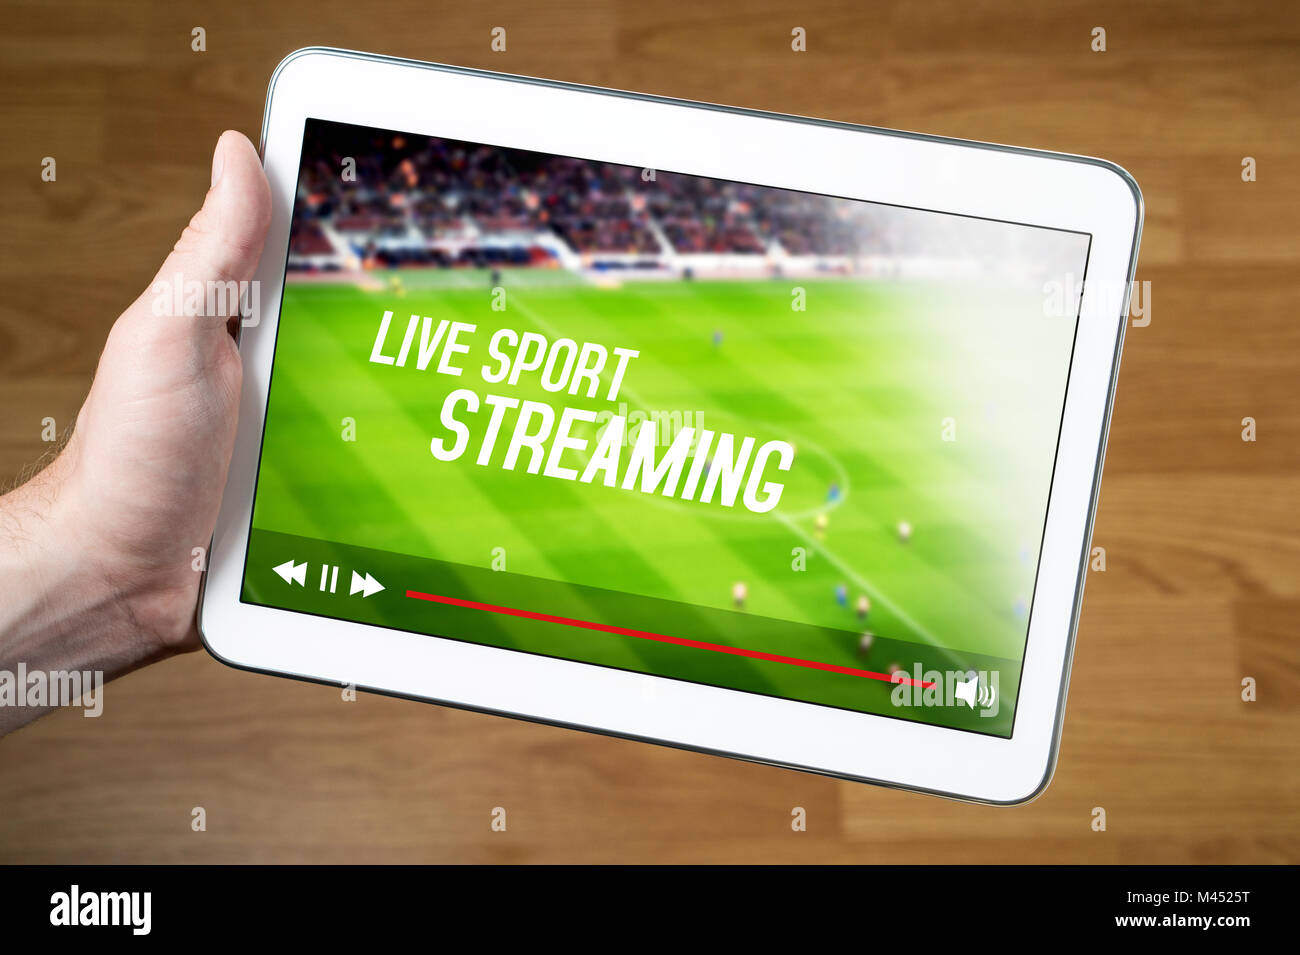 Man watching live sport stream online with mobile device. Hand holding tablet with imaginary video player and streaming service. Stock Photo